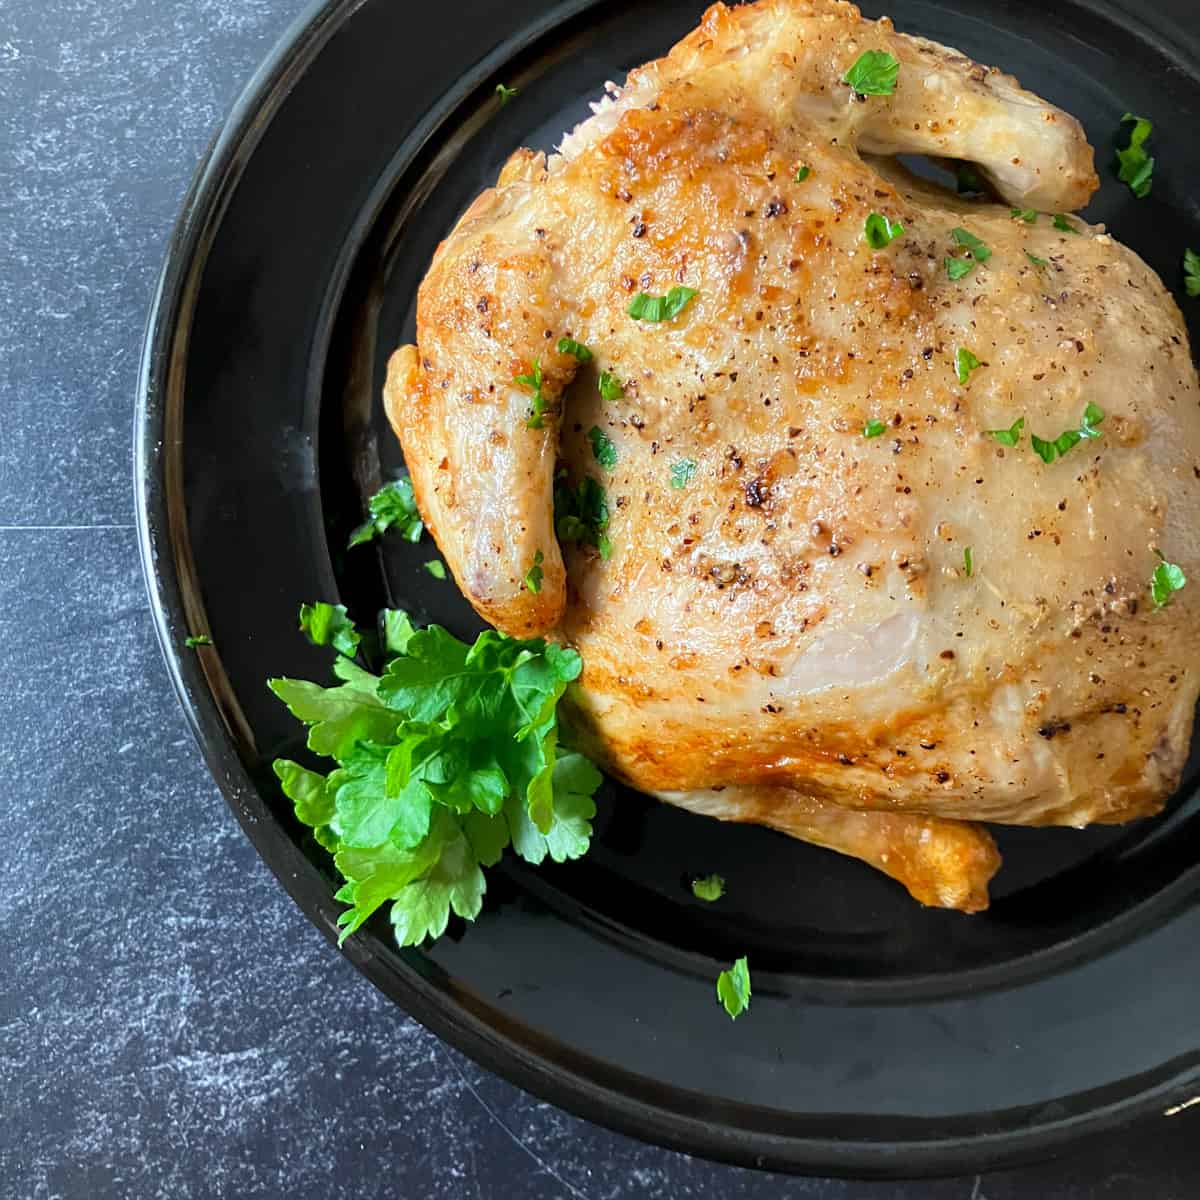 Cook with Kalorik: How-To Truss Your Rotisserie Chicken